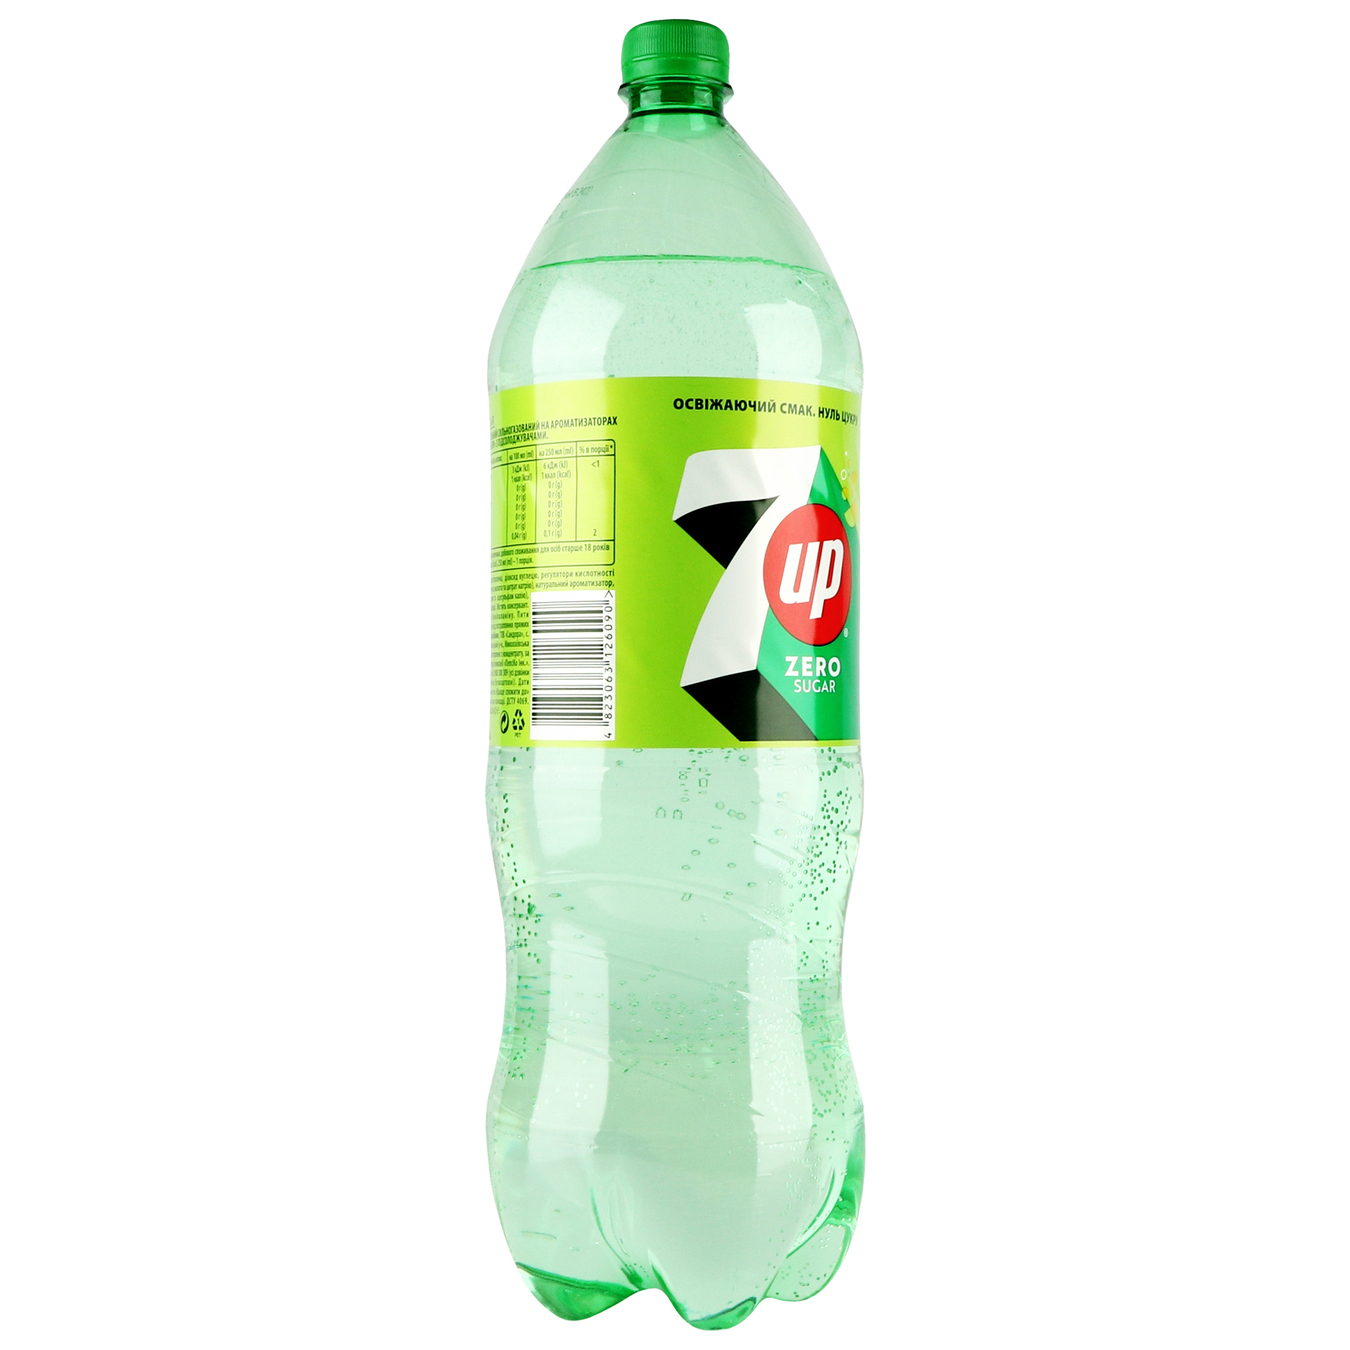  Carbonated drink 7 UP Free 2 l 2